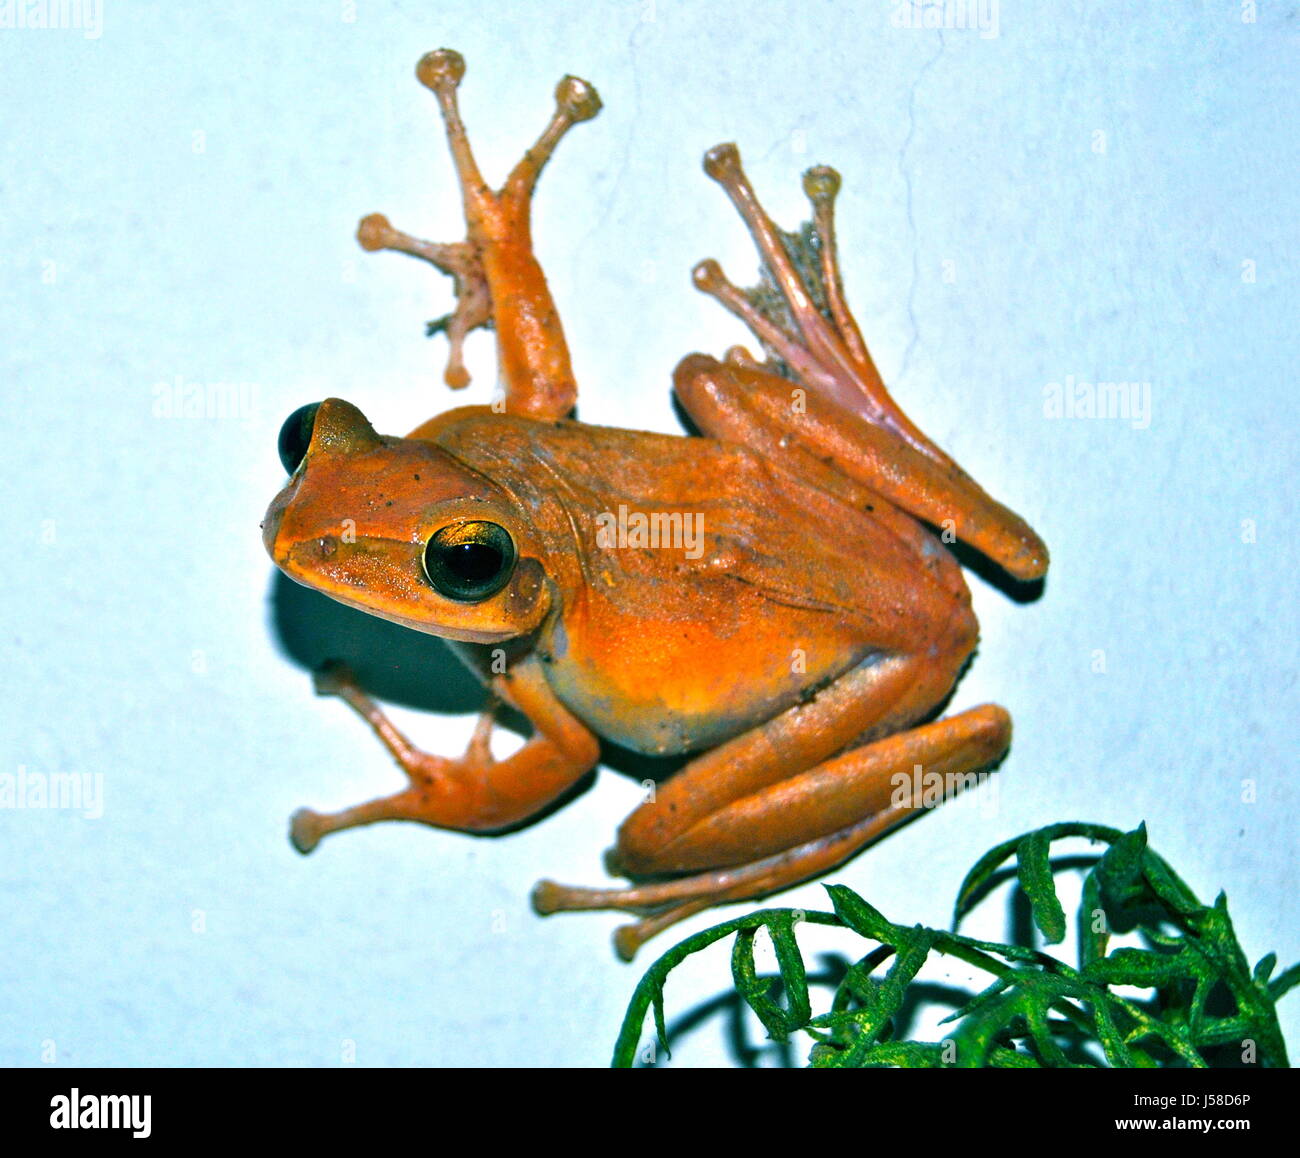 Inquisitive frog, Can Tho city, Vietnam Stock Photo